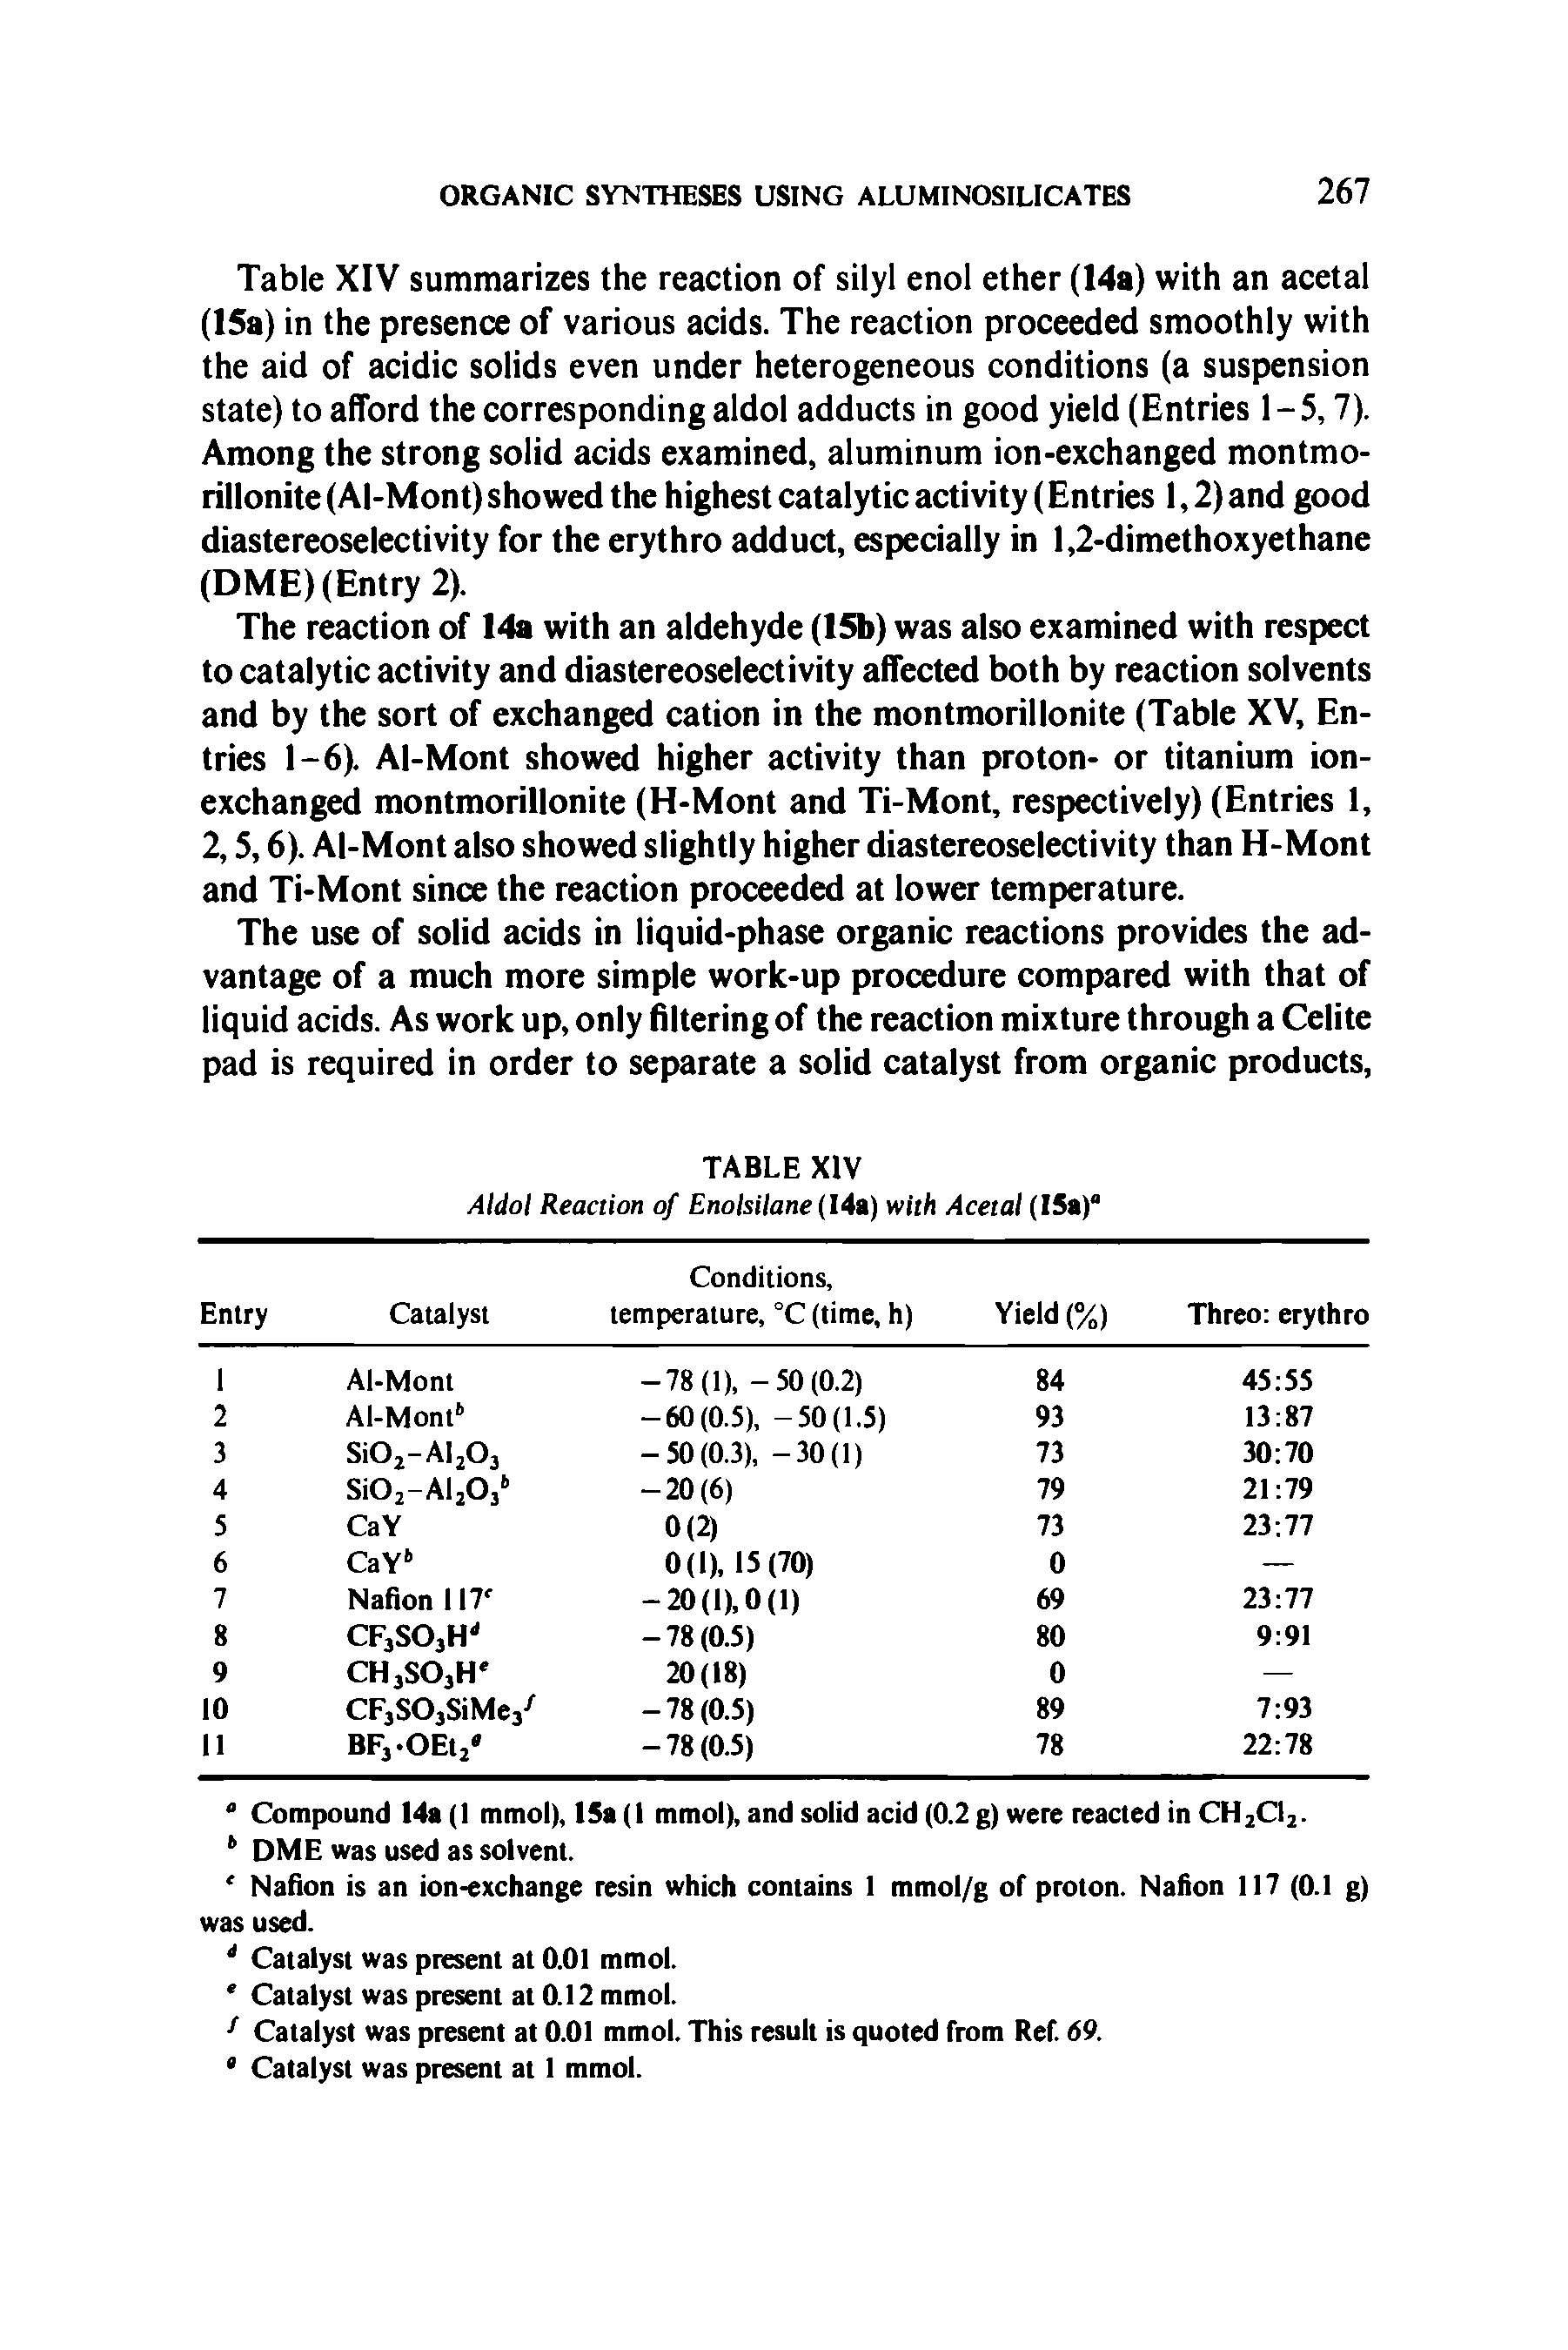 Table XIV summarizes the reaction of silyl enol ether (14a) with an acetal (15a) in the presence of various acids. The reaction proceeded smoothly with the aid of acidic solids even under heterogeneous conditions (a suspension state) to afford the corresponding aldol adducts in good yield (Entries 1 - 5,7). Among the strong solid acids examined, aluminum ion-exchanged montmo-rillonite (Al-Mont) showed the highest catalytic activity (Entries 1,2) and good diastereoselectivity for the erythro adduct, especially in 1,2-dimethoxyethane (DME)(Entry 2).